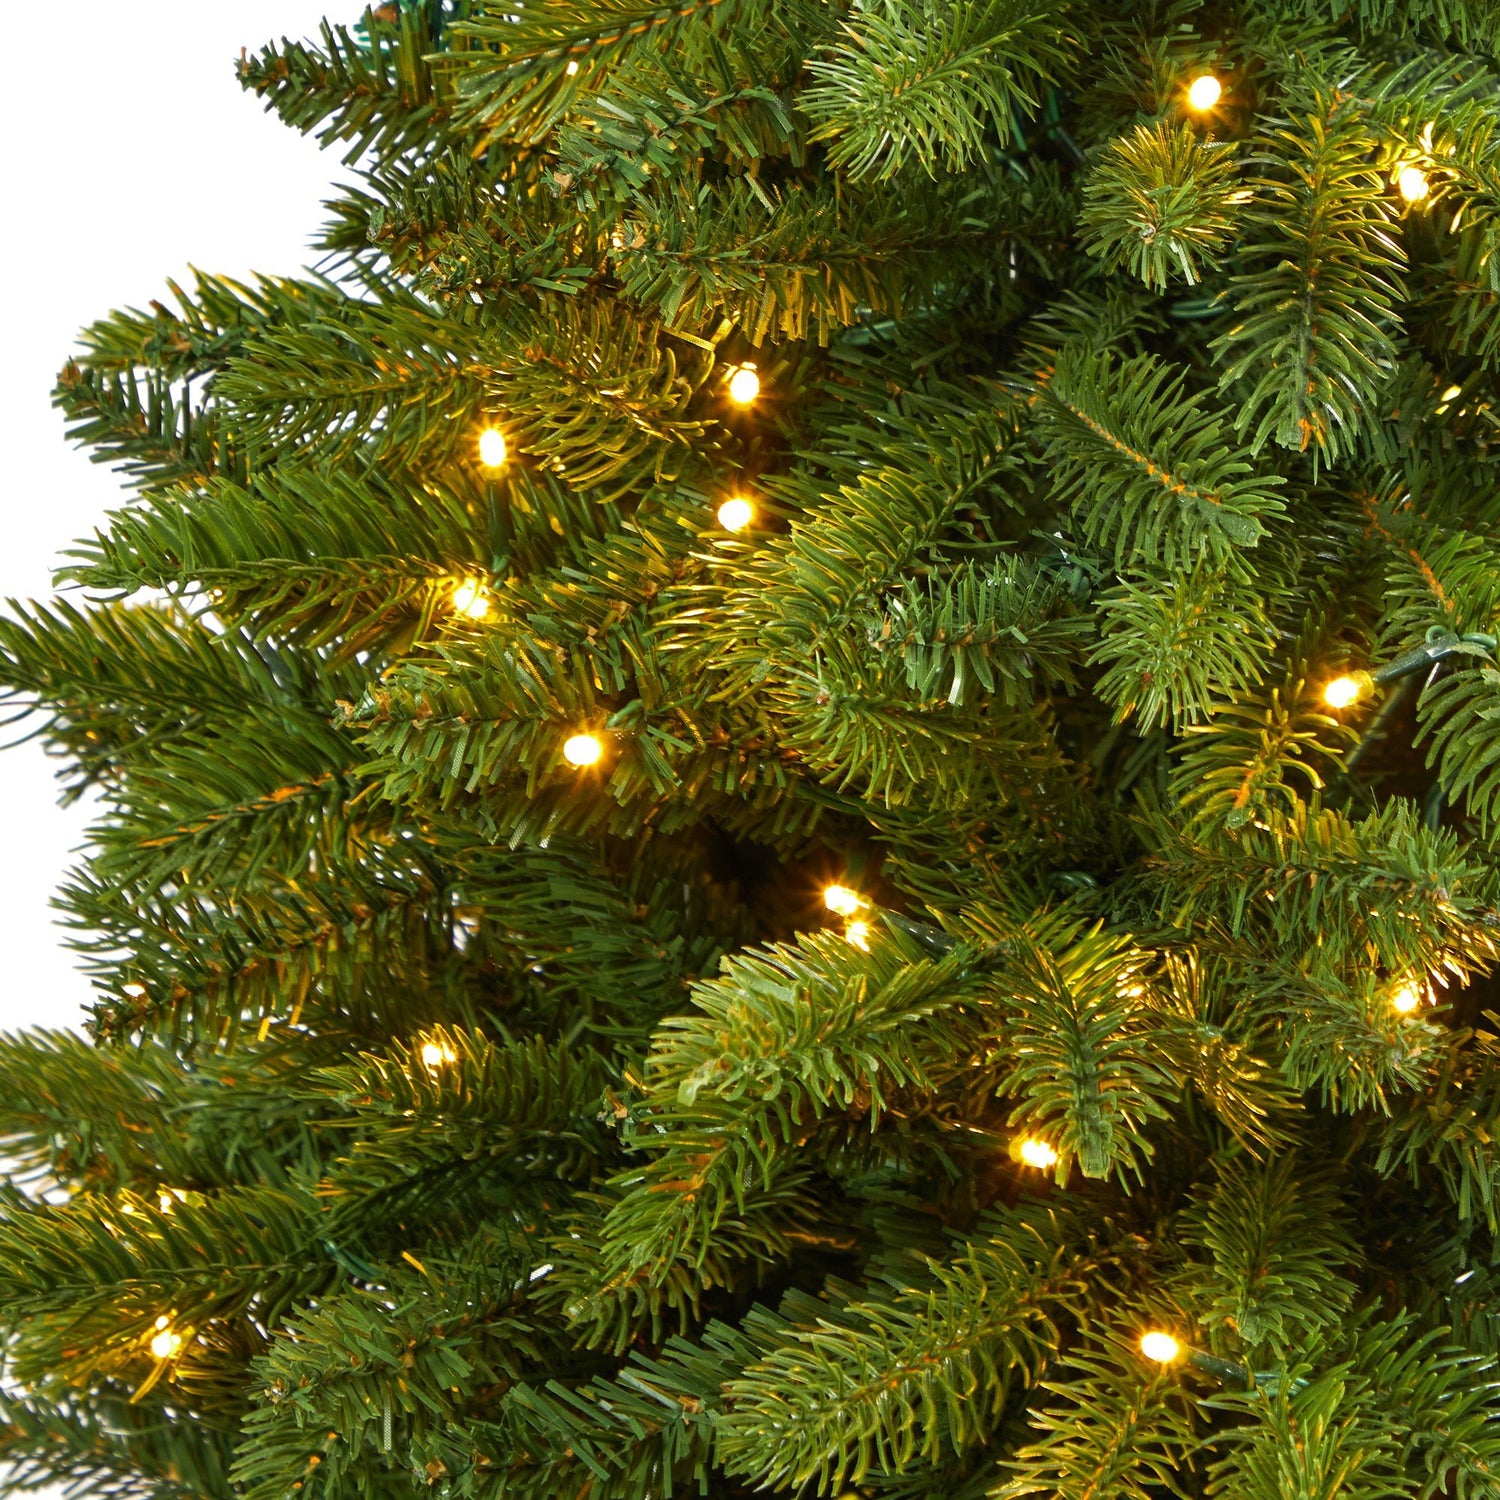 50” Sierra Spruce “Natural Look” Artificial Christmas Tree with 150 Clear LED Lights in White Planter